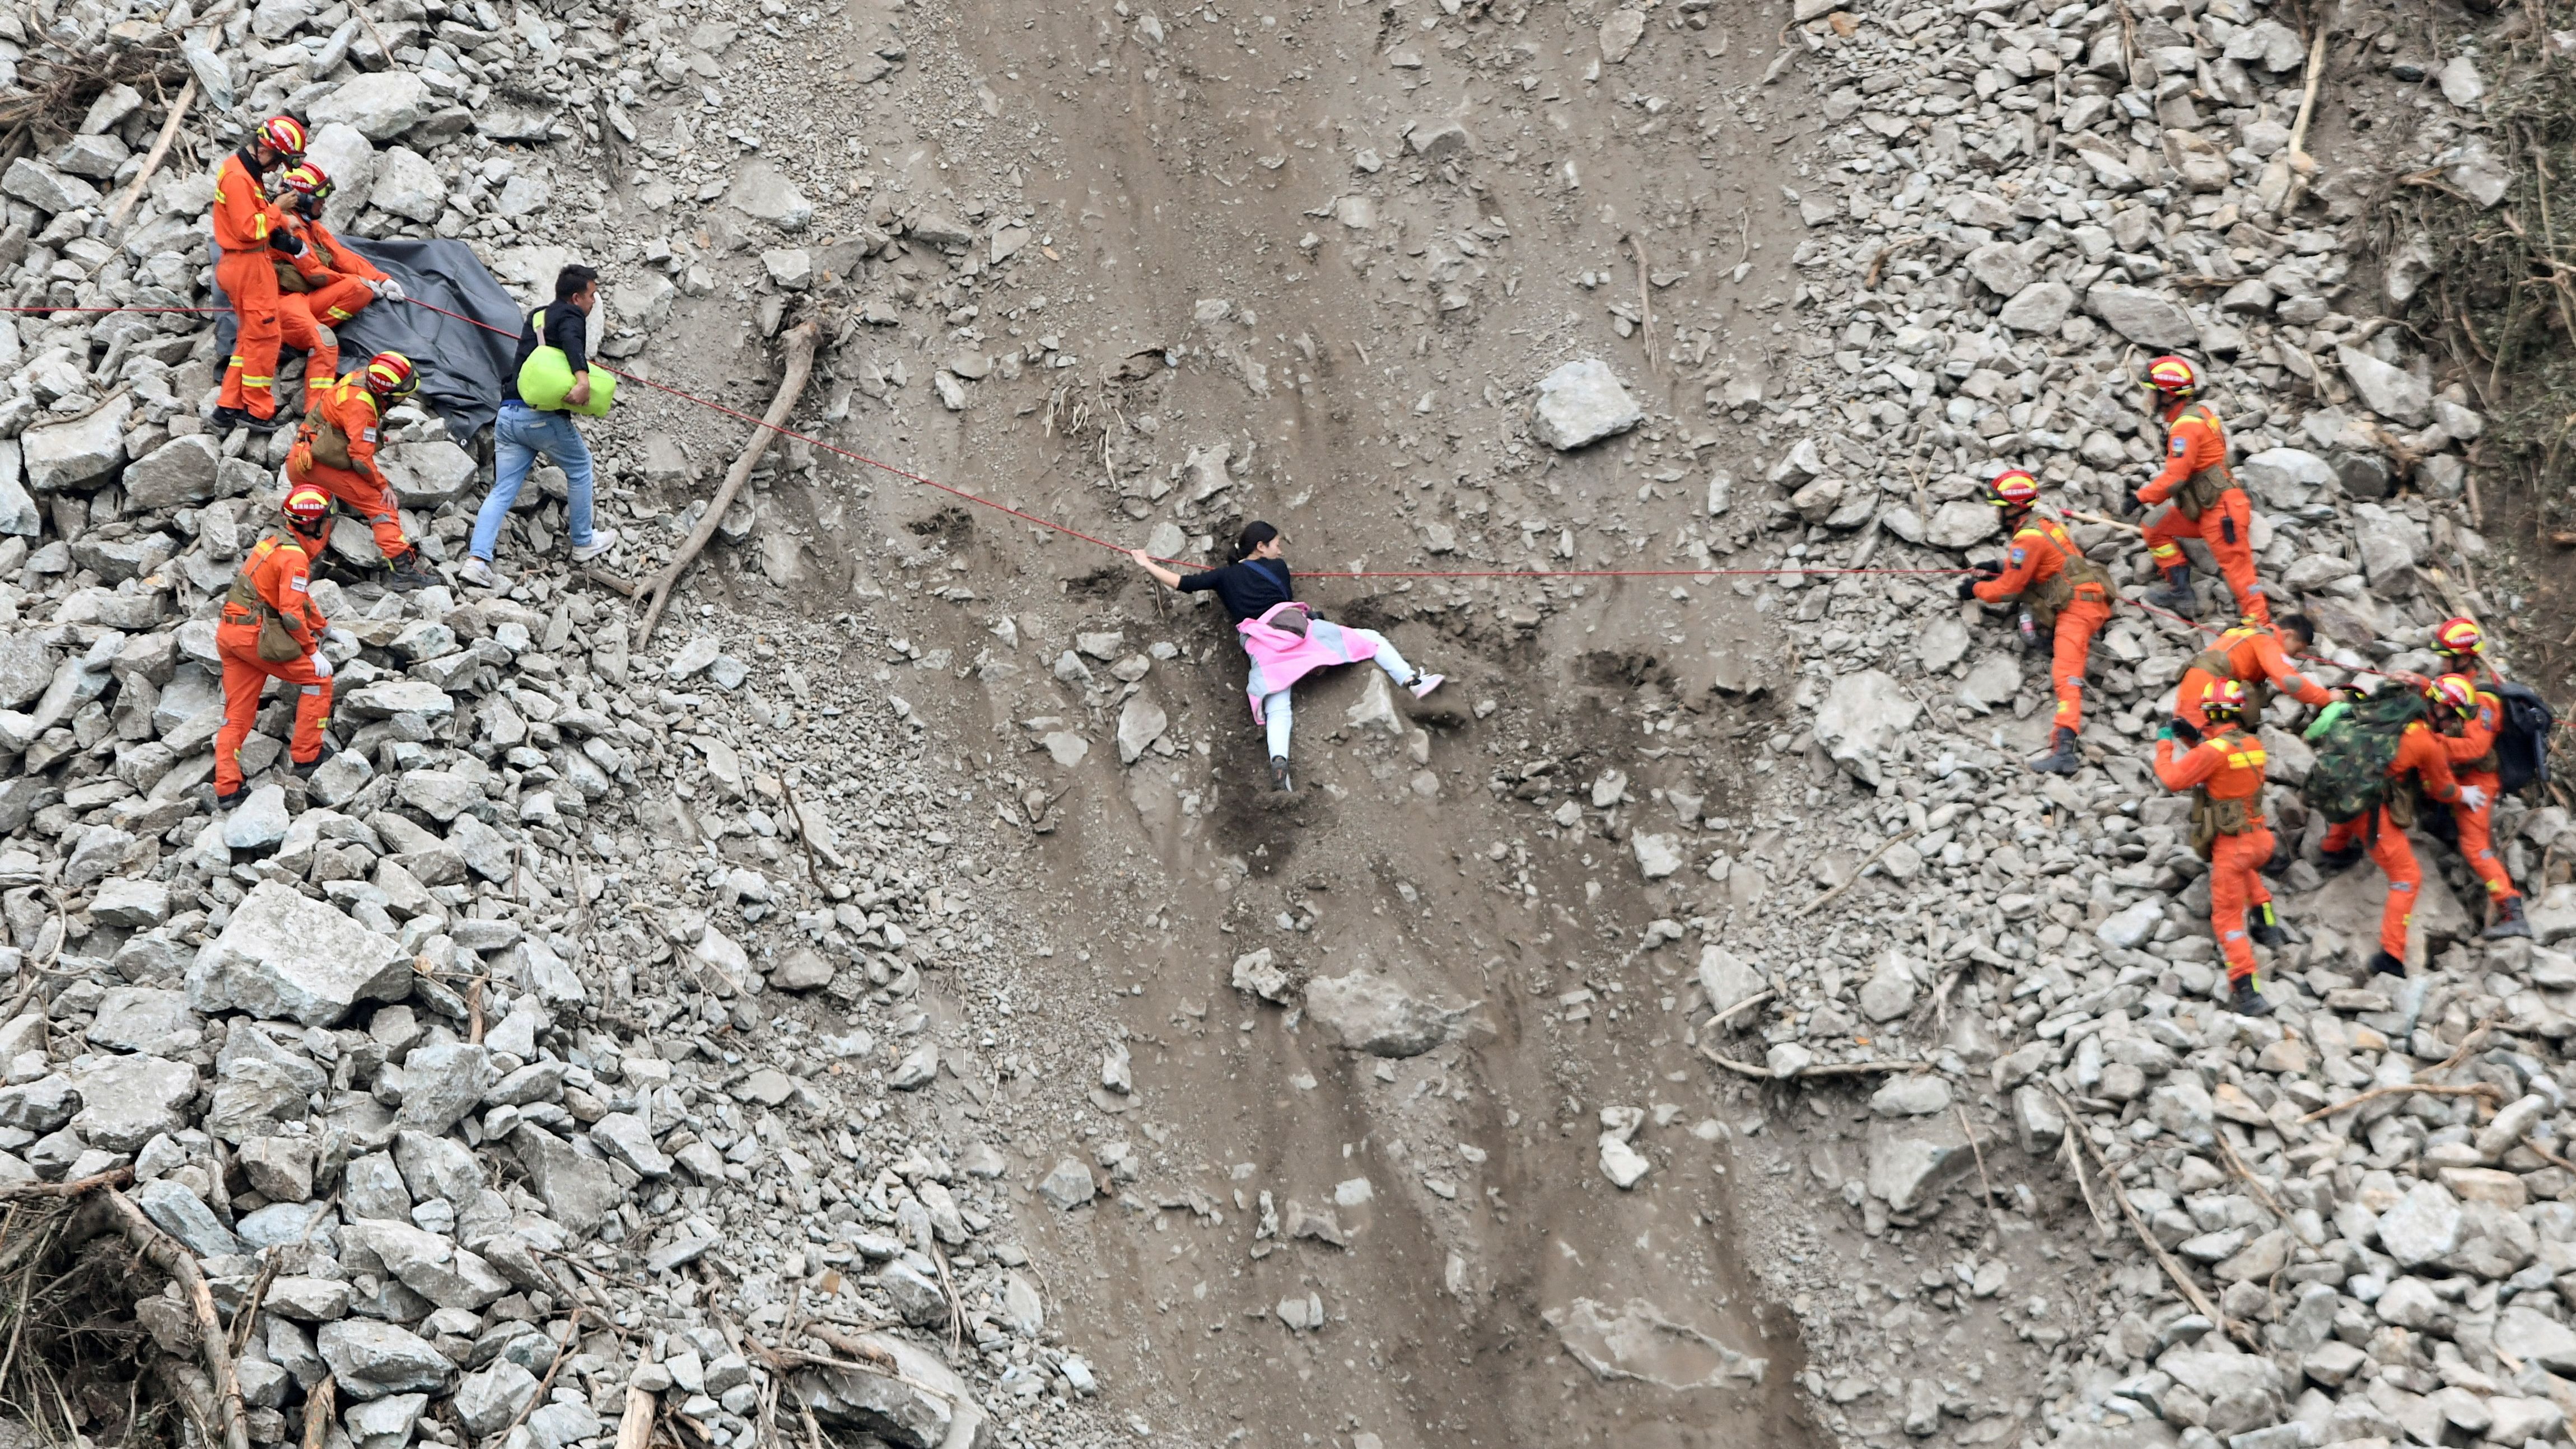 Rescue workers help people after <a href="https://www.cnn.com/2022/09/05/china/china-earthquake-sichuan-intl-hnk/index.html" target="_blank">an earthquake</a> caused a landslide near Moxi Town, China, on Tuesday, September 6.